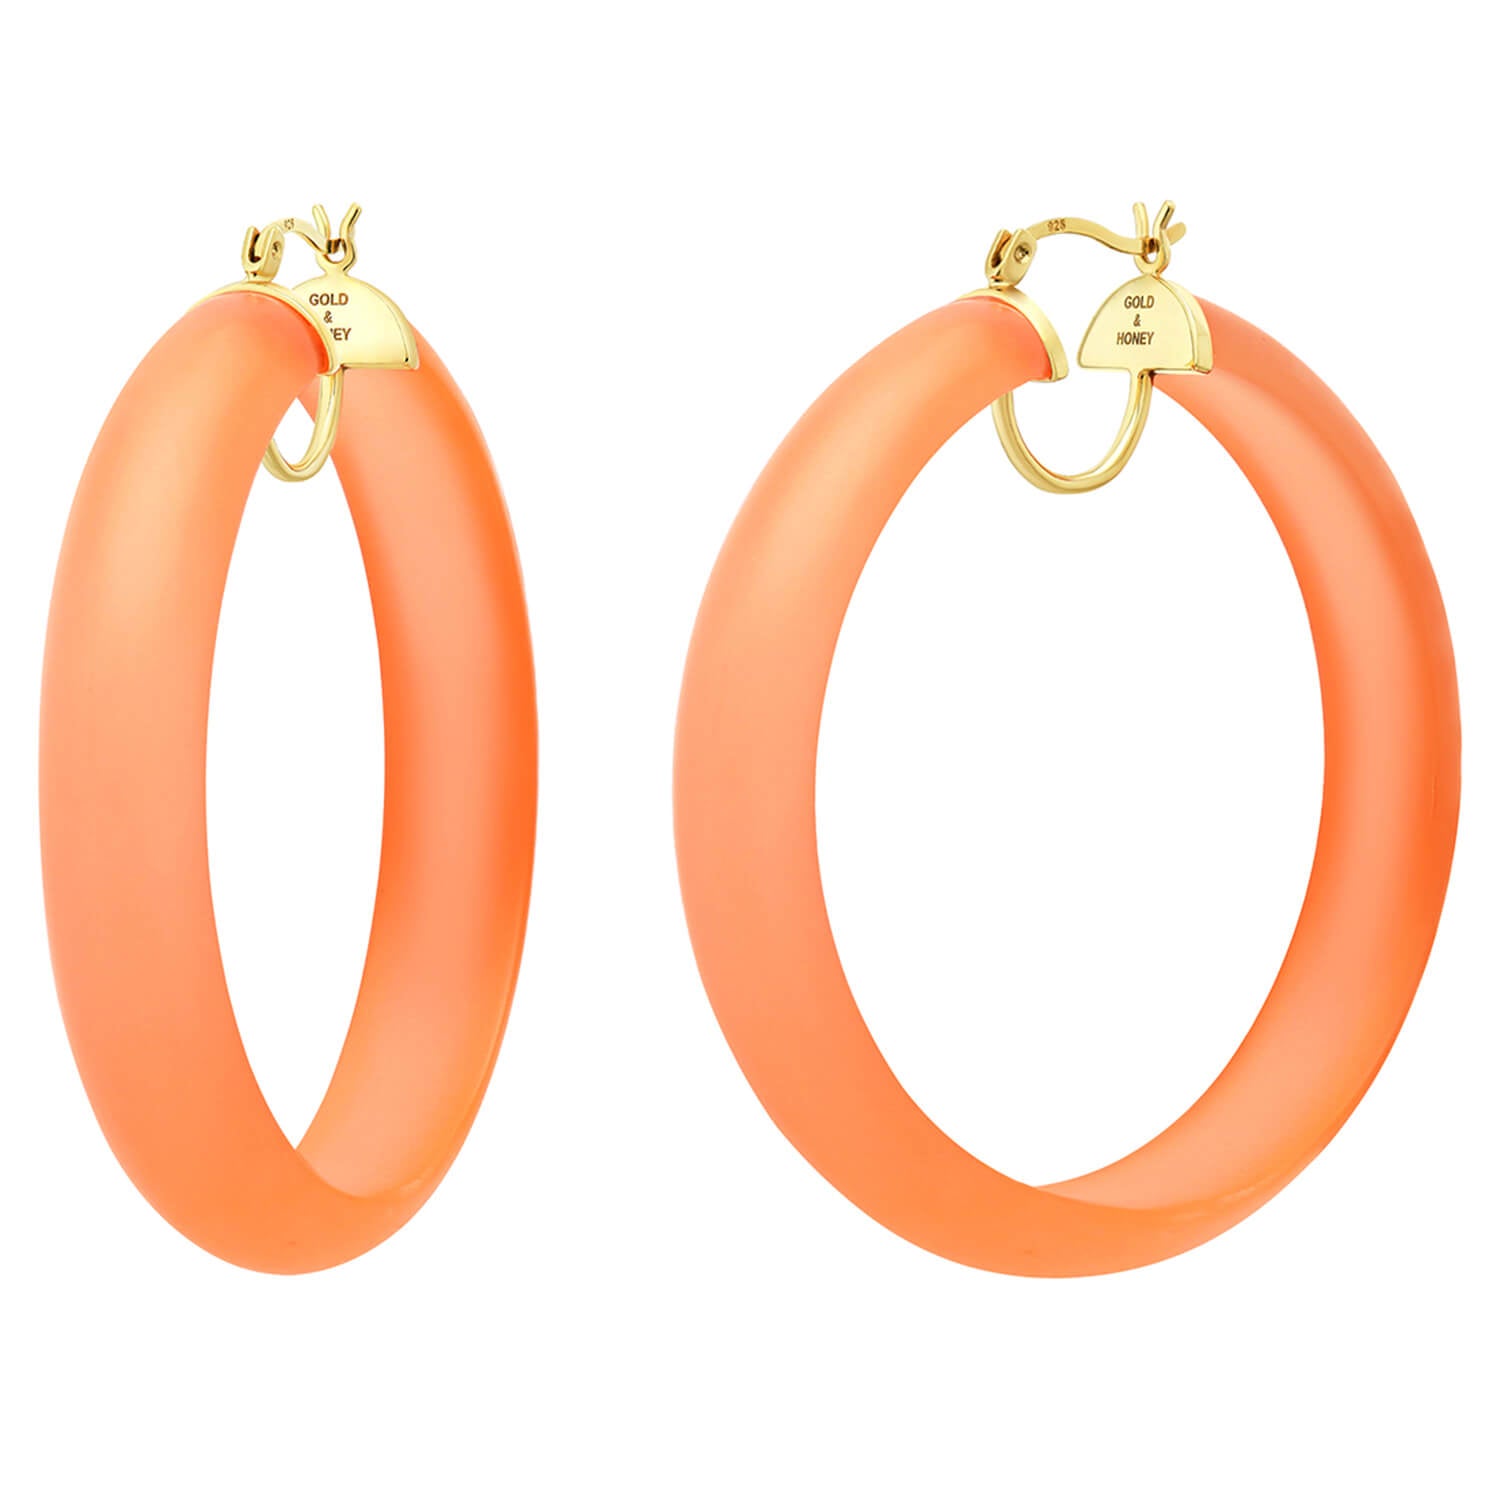 Frosted Lucite Hoops in Orange